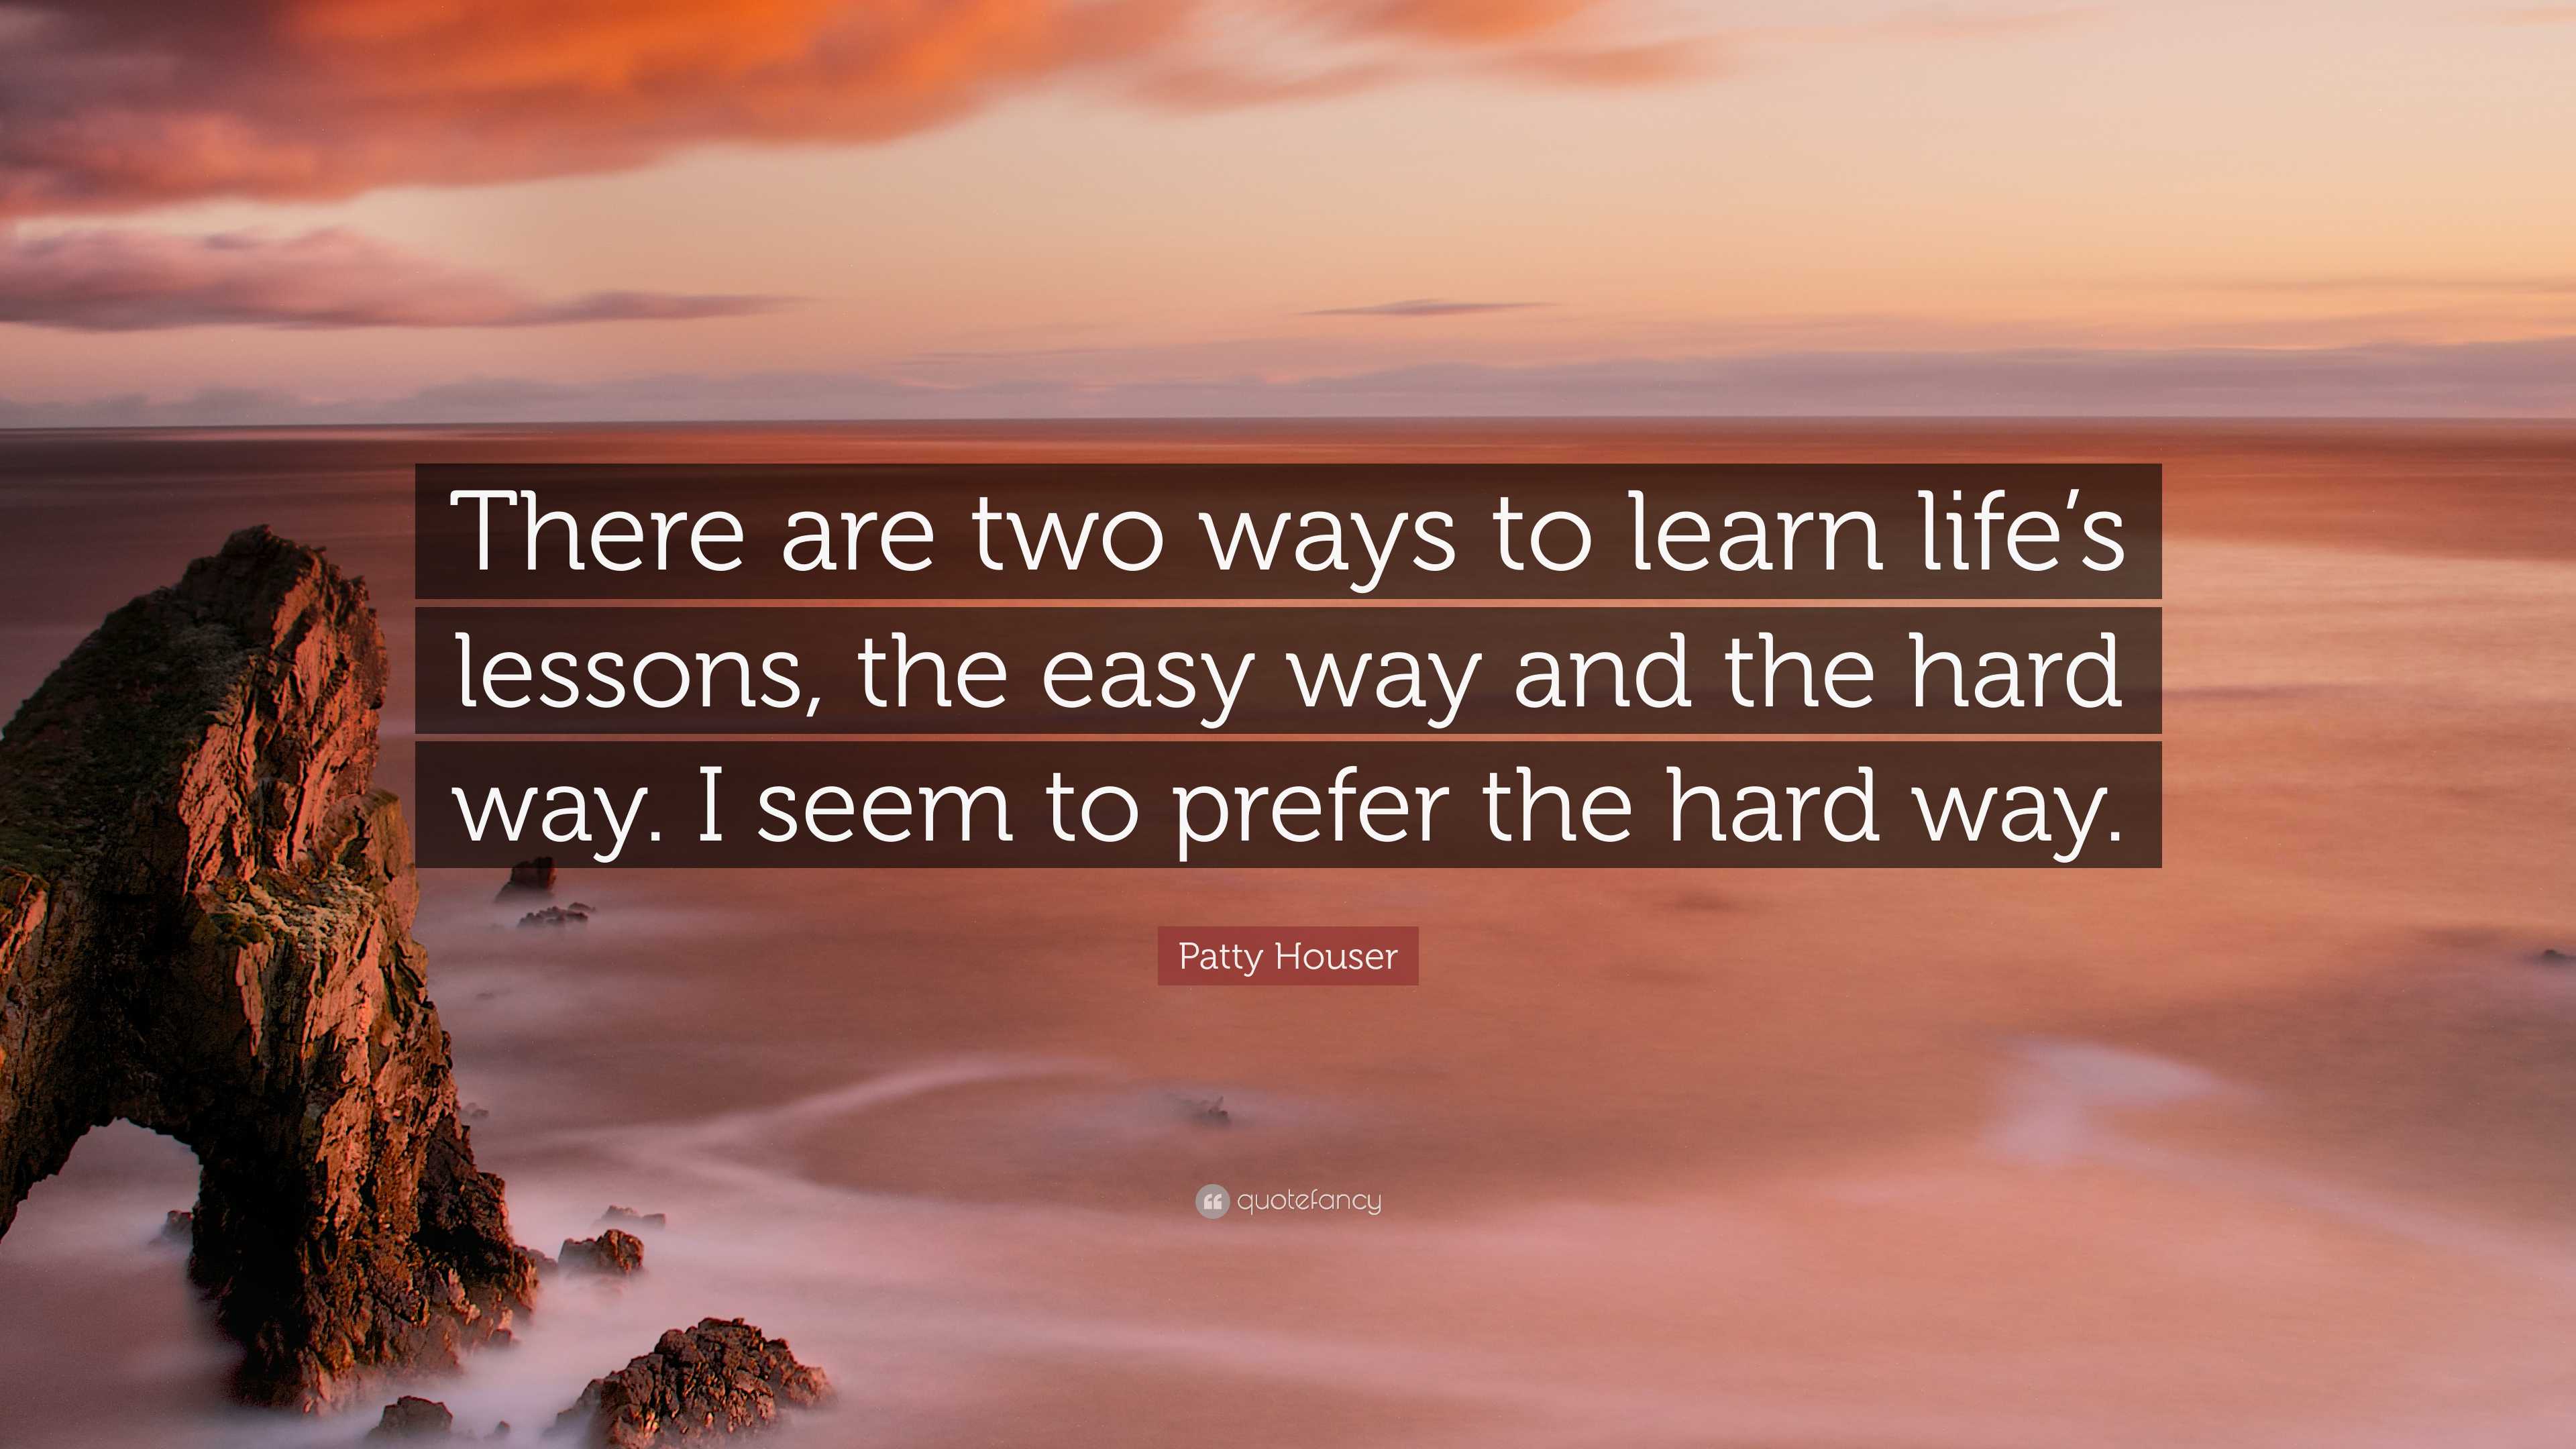 Patty Houser Quote: “There are two ways to learn life's lessons, the easy  way and the